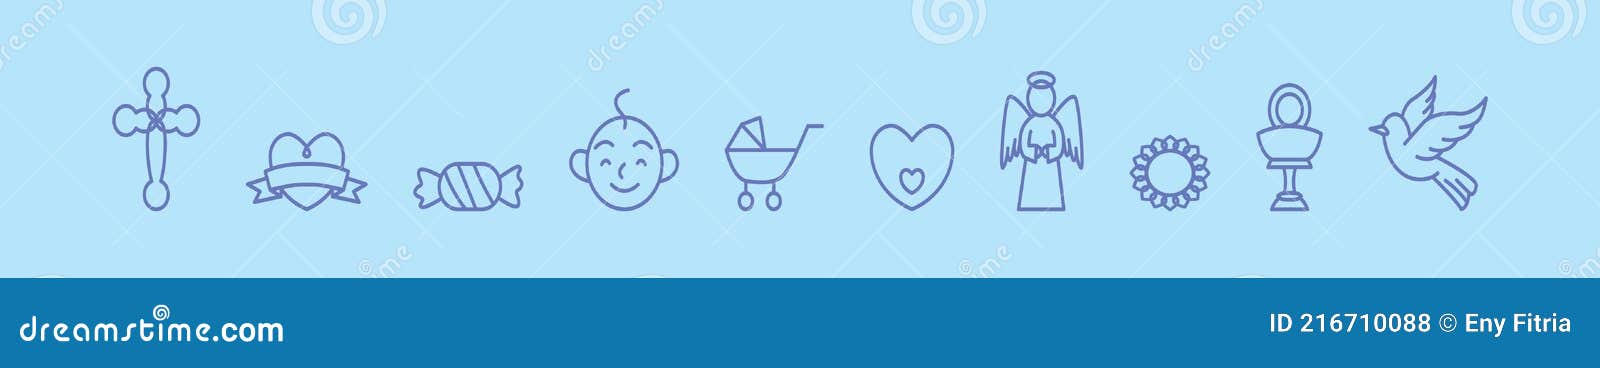 set of catholic cartoon icon  template with various models.    on blue background